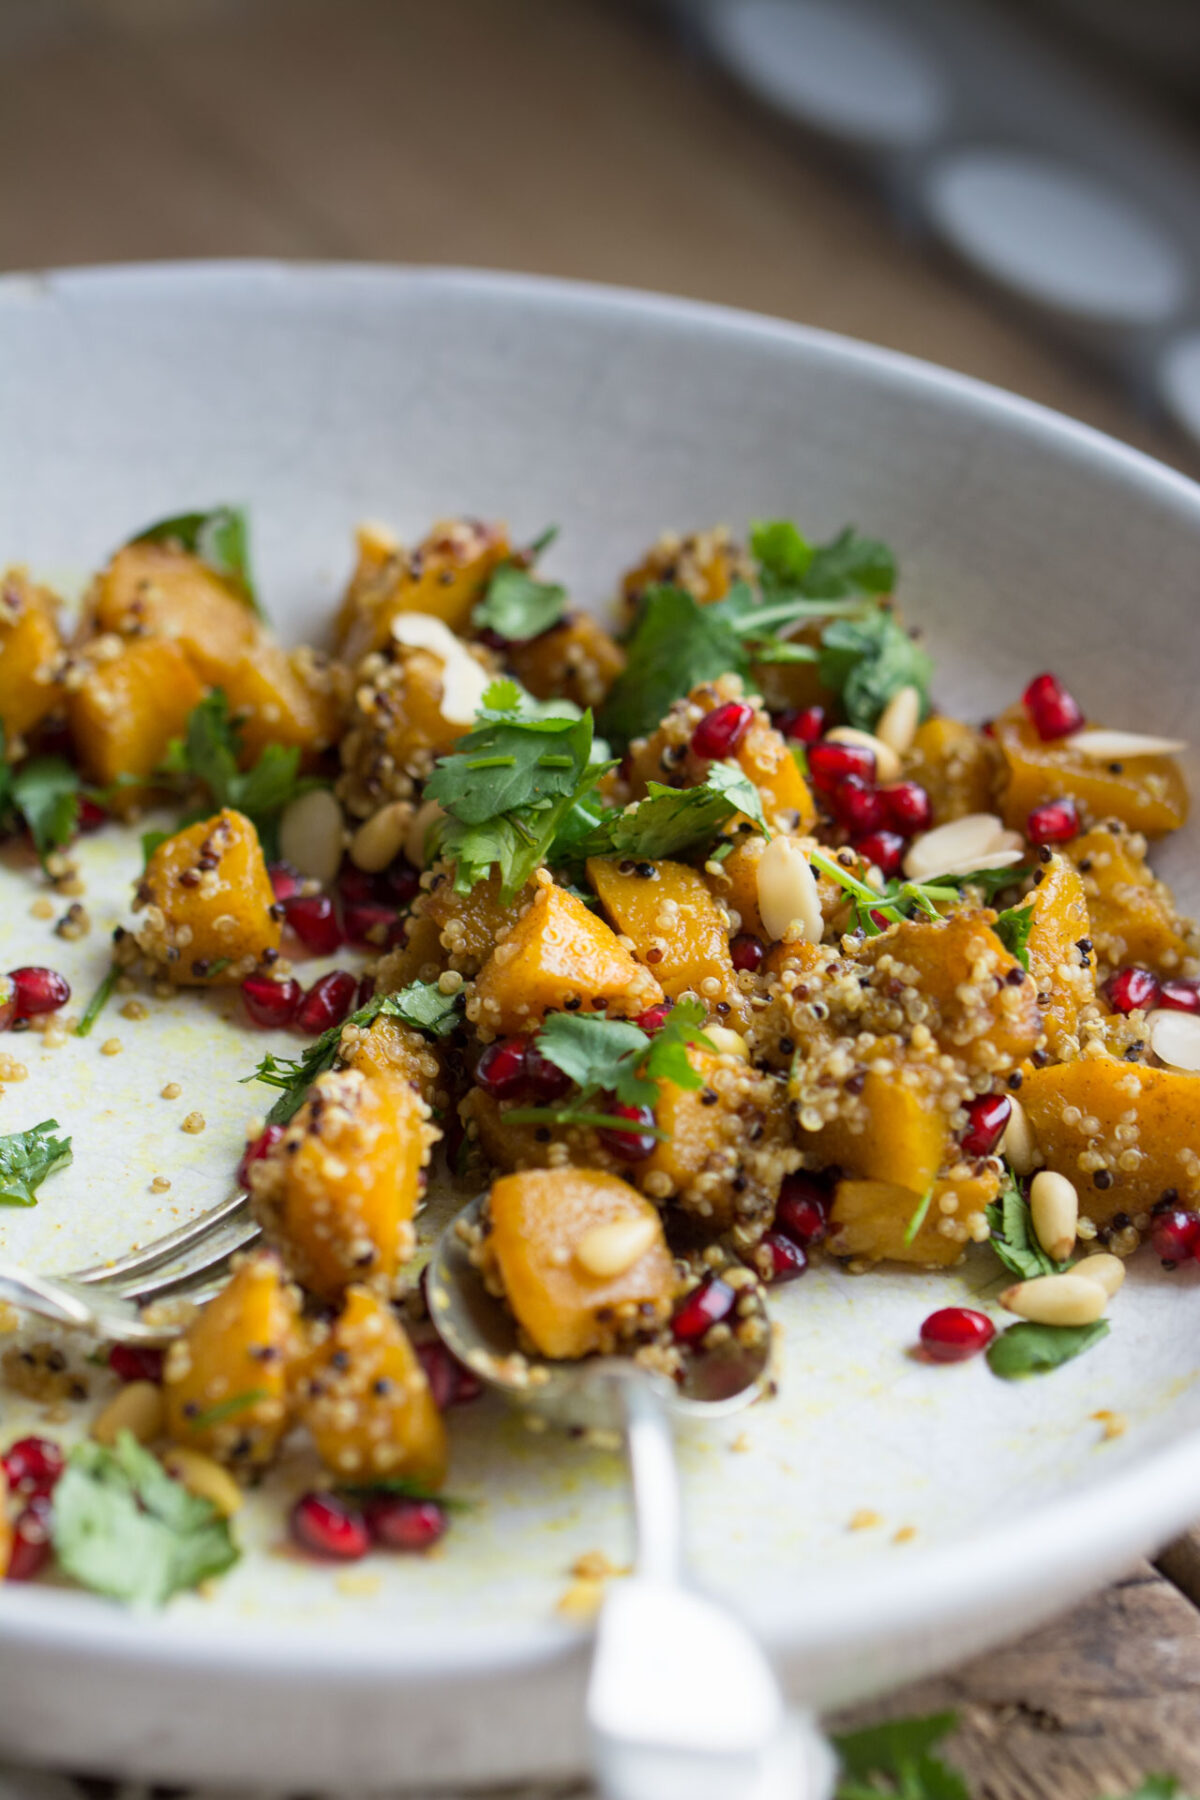 In this delicious vegan marinated pumpkin salad, all of the best sweet and savoury flavours come together to make the PERFECT fall salad!